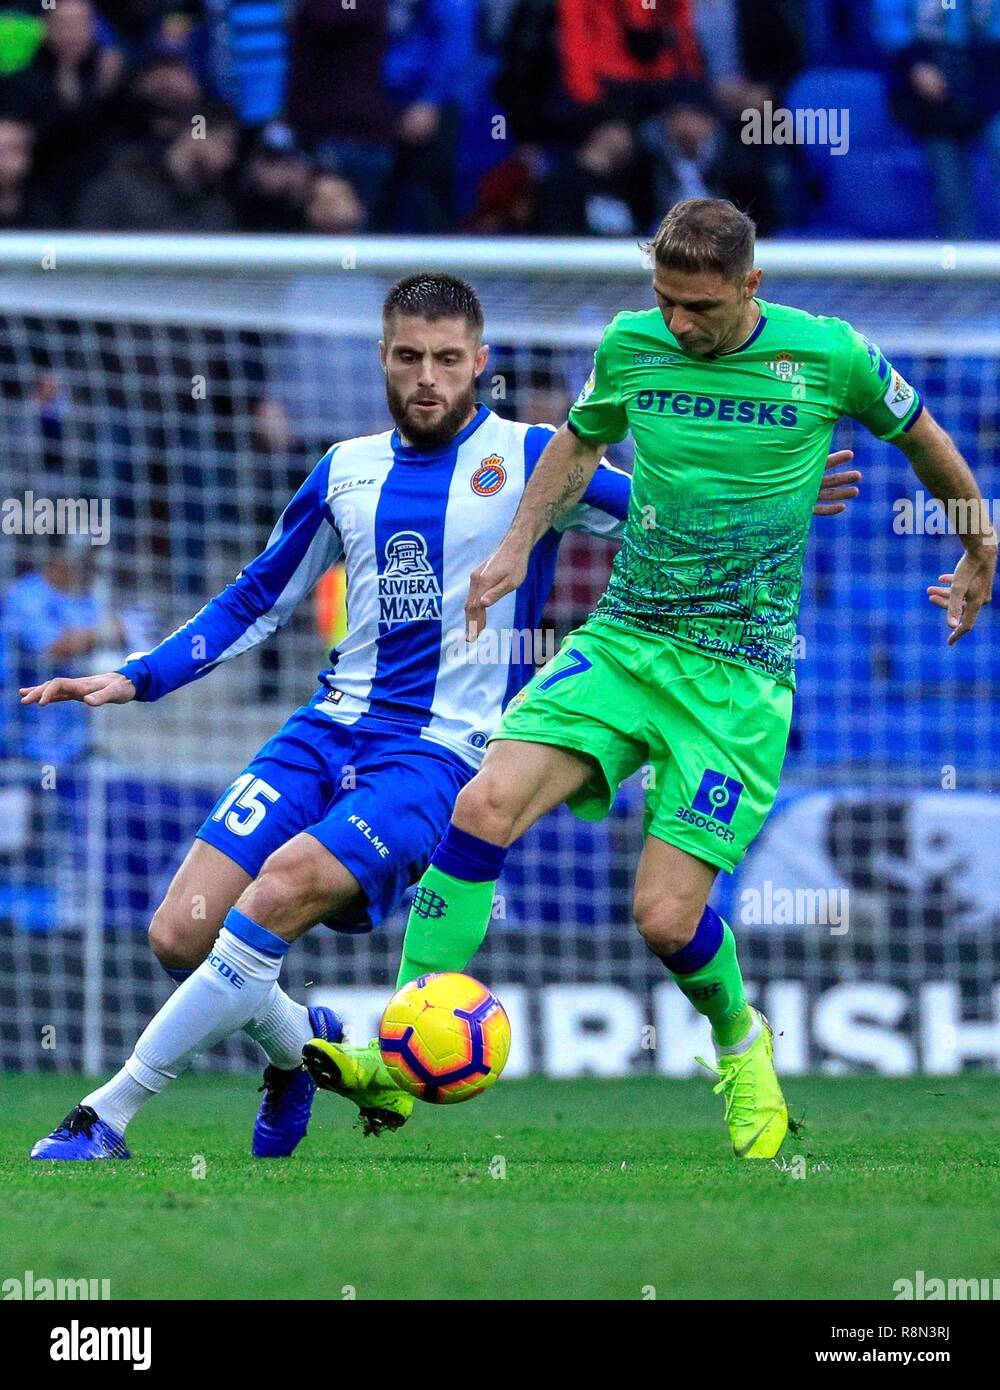 Barcelona, Spain. 16th Dec, 2018. RCD Espanyol's David Lopez (L) vies with Real  Betis' Joaquin Sanchez Rodriguez during a Spanish league match between RCD  Espanyol and Real Betis in Barcelona, Spain, on